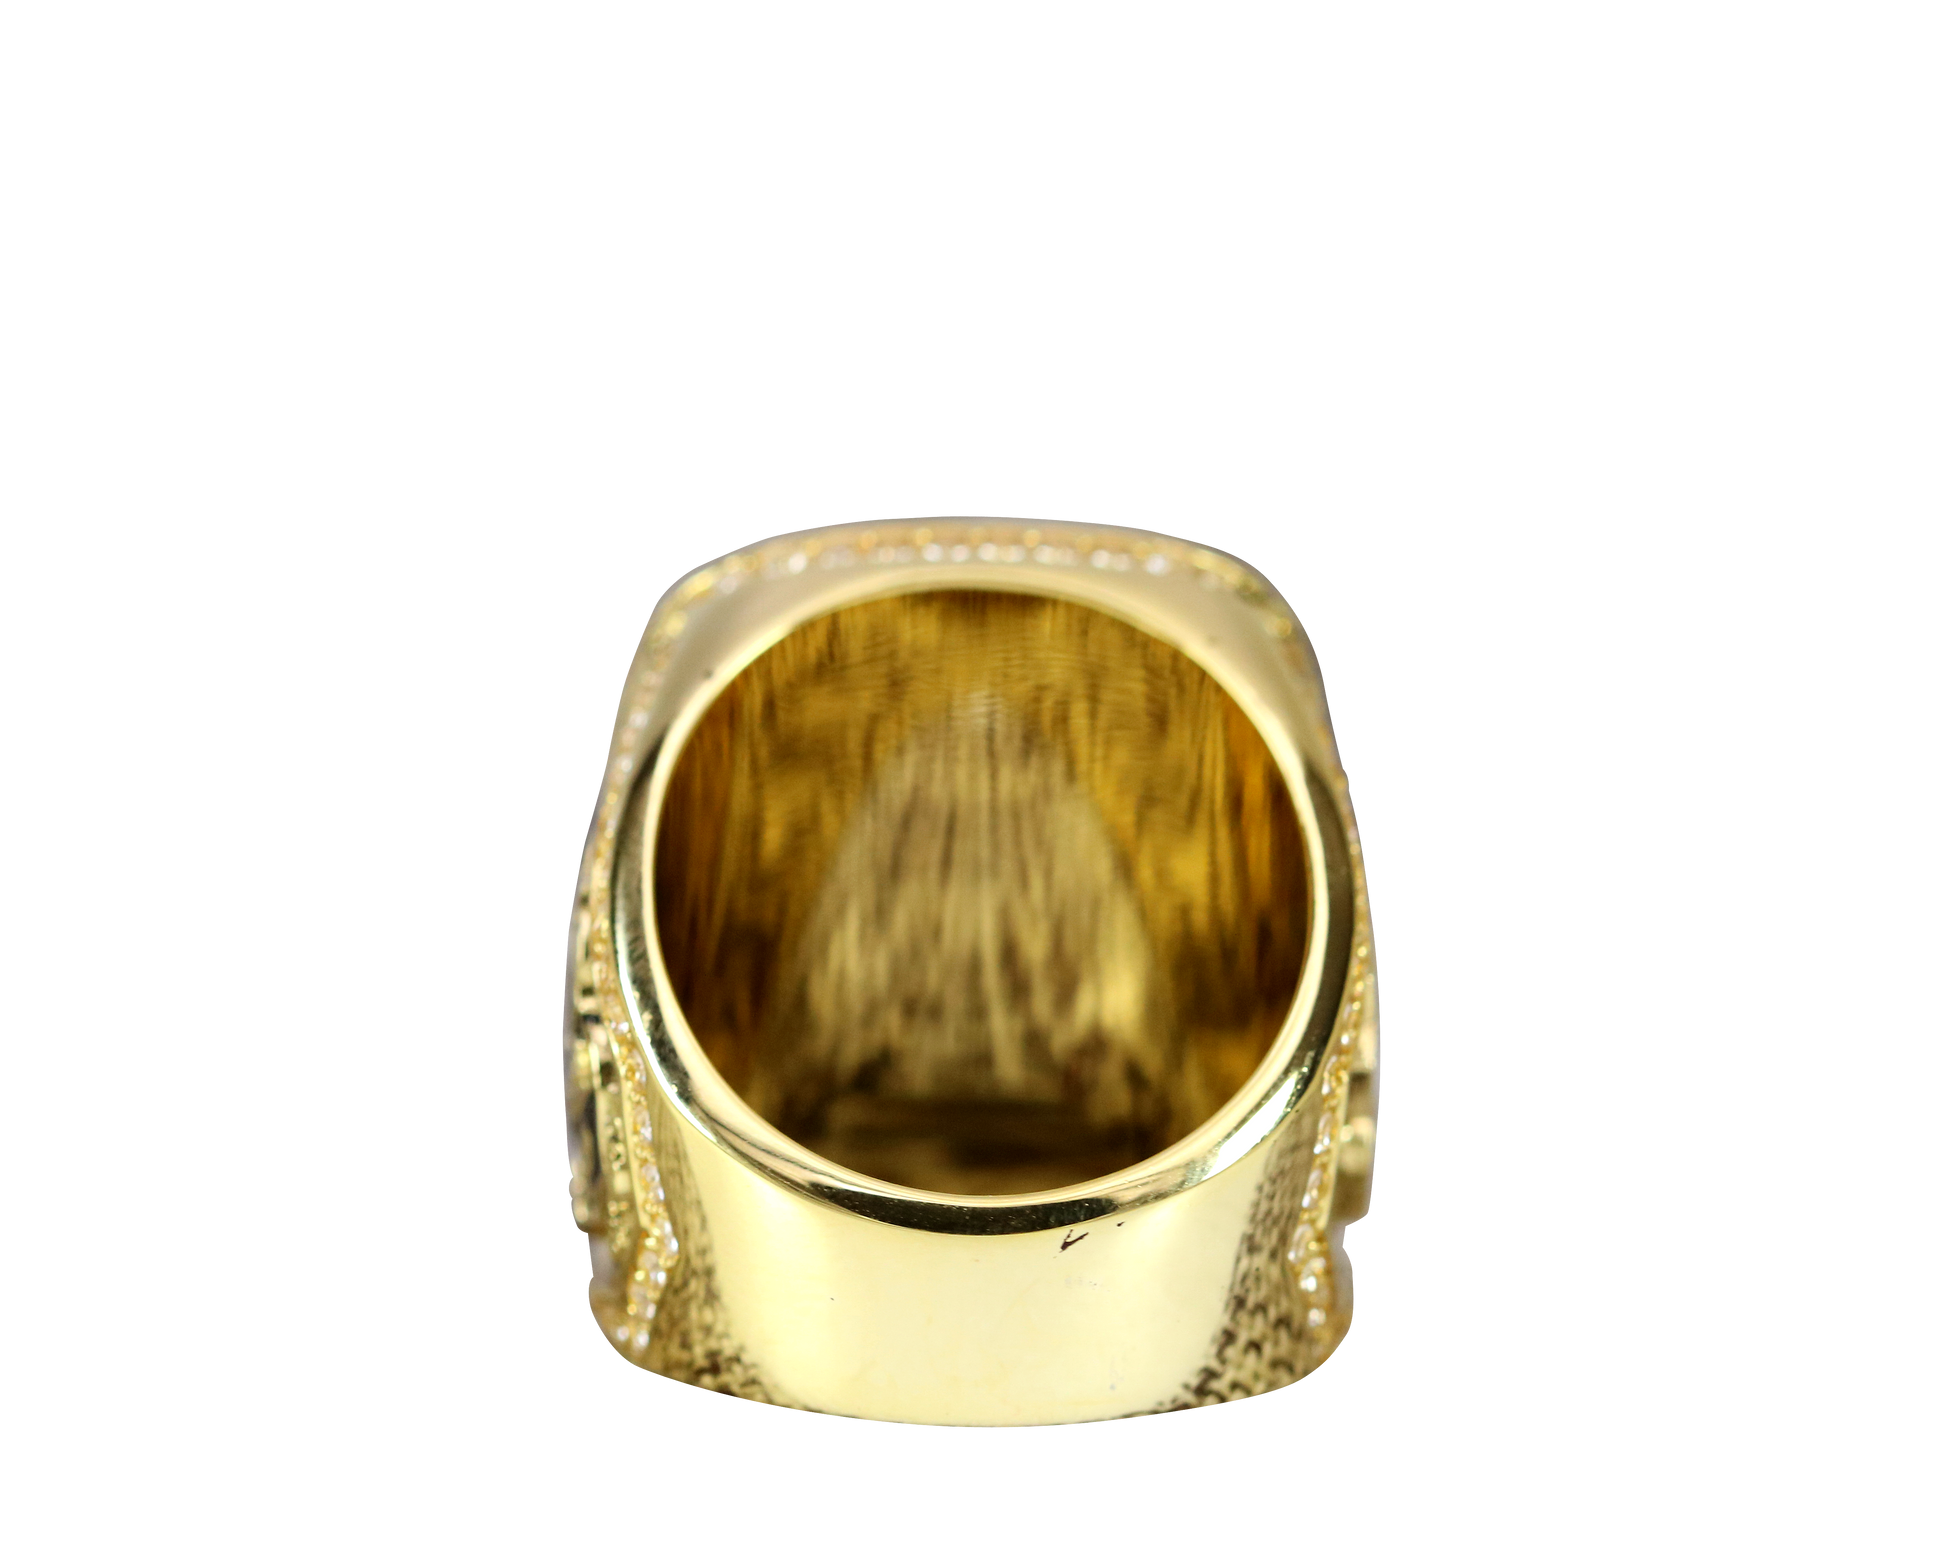 Sigma Nu Fraternity Ring Yellow Gold (ΣΝ) - Shine Series - fratrings - NPHC Rings, HBCU Rings, Fraternity Rings, Frat Rings, Sorority Rings, Military Rings, Mason Rings, Free Mason Rings